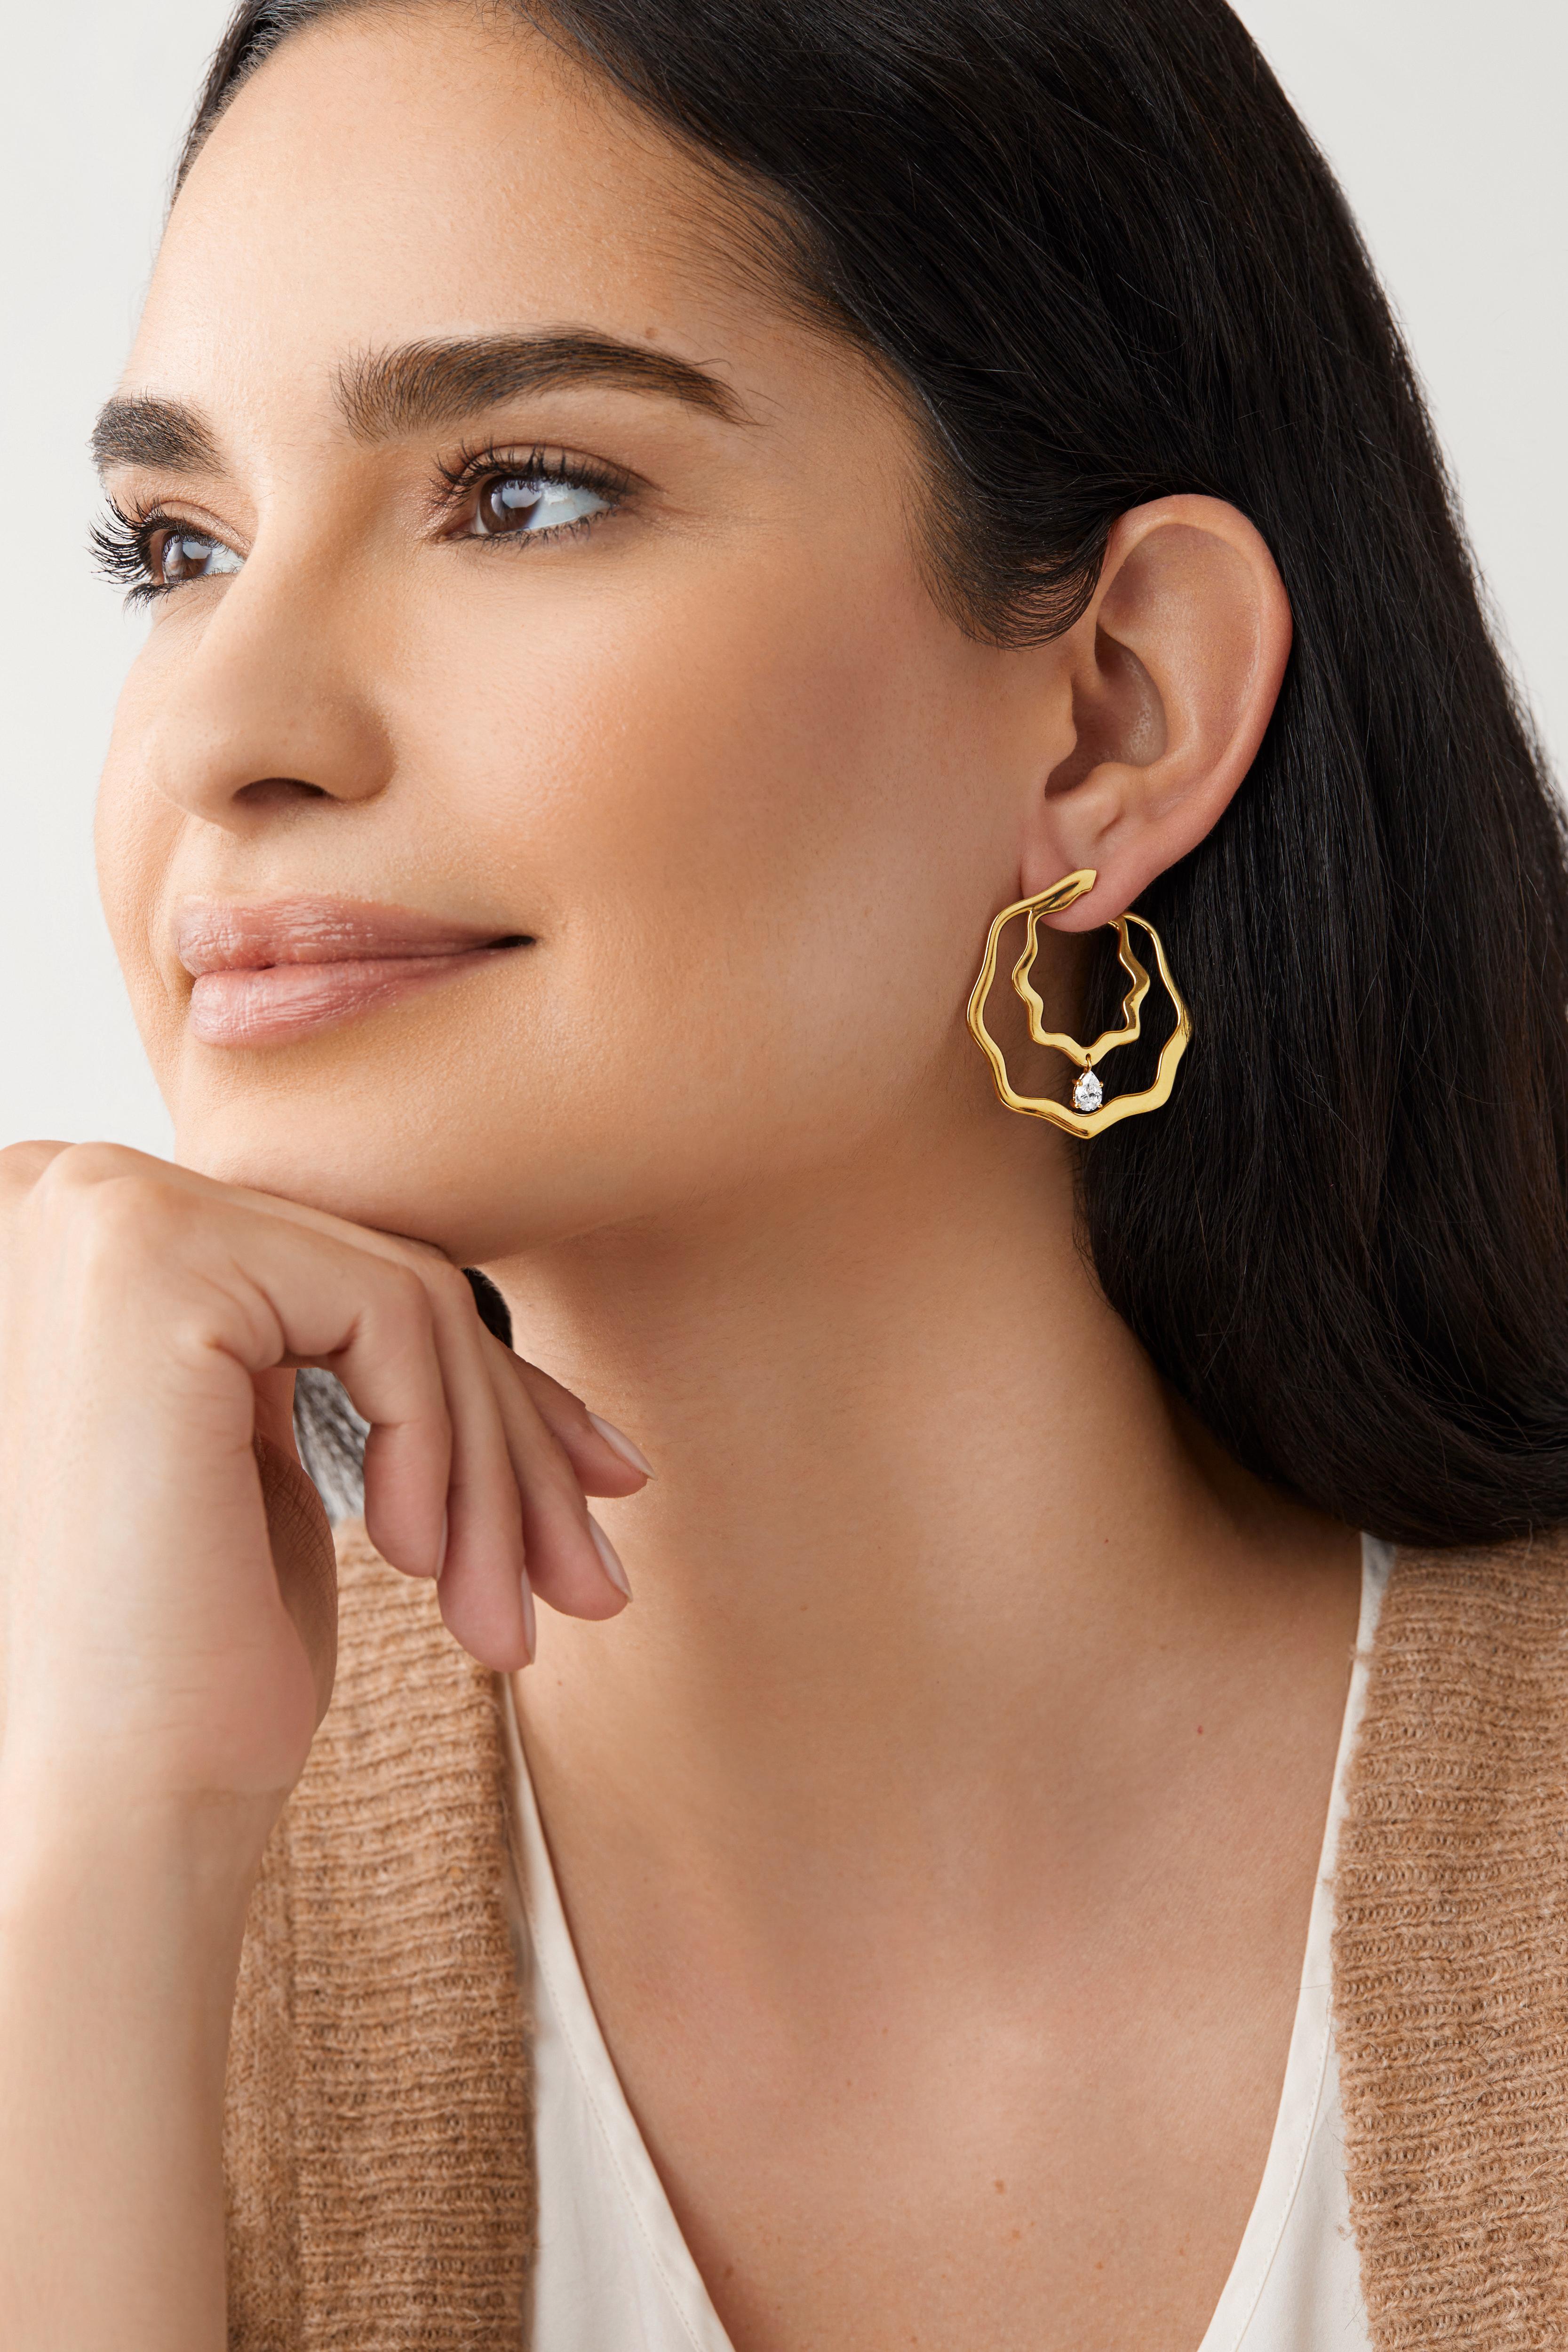 The Binny Hoops are named after the grandmother of designer Jessenia Landrum. Binny was an influential figure within Boston's Housing Authority who created space for others within the community to thrive. 

This design takes inspiration from the